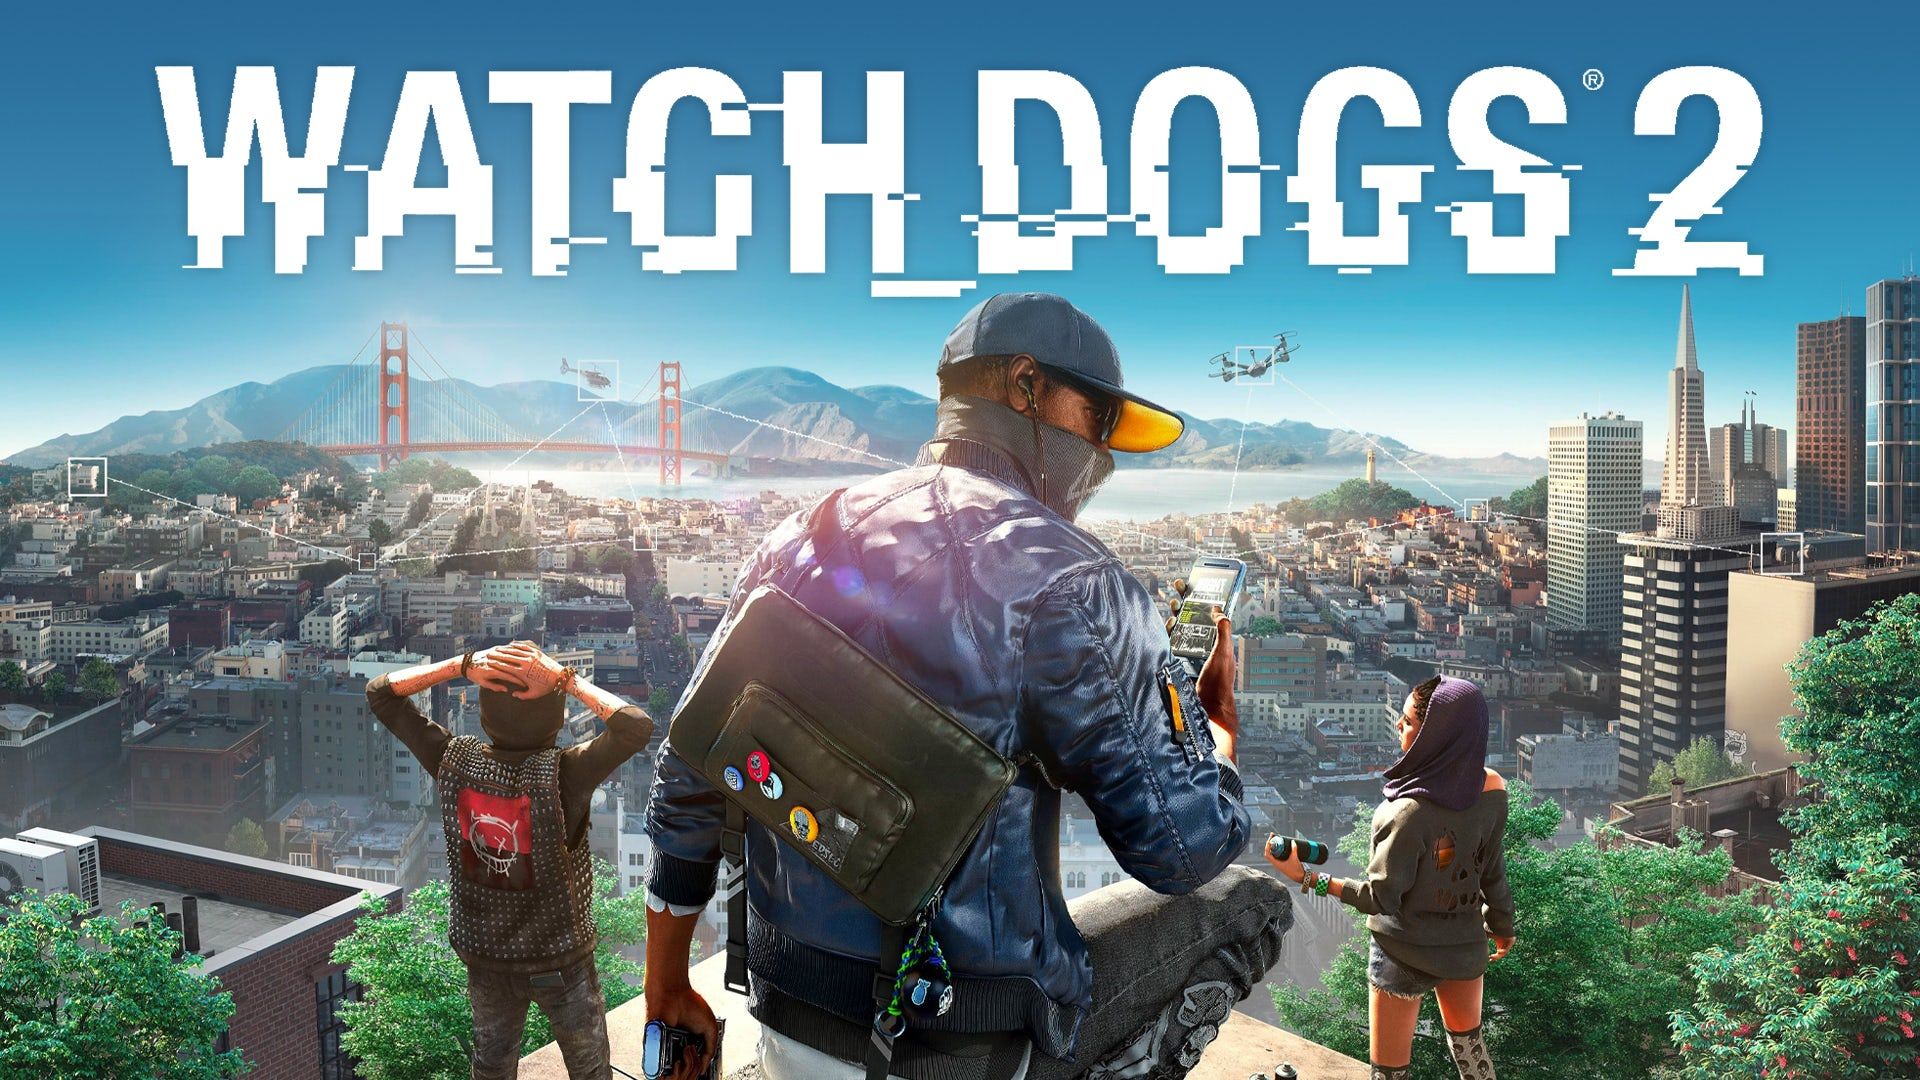 Is Watch Dogs 2 PC a good sequel?